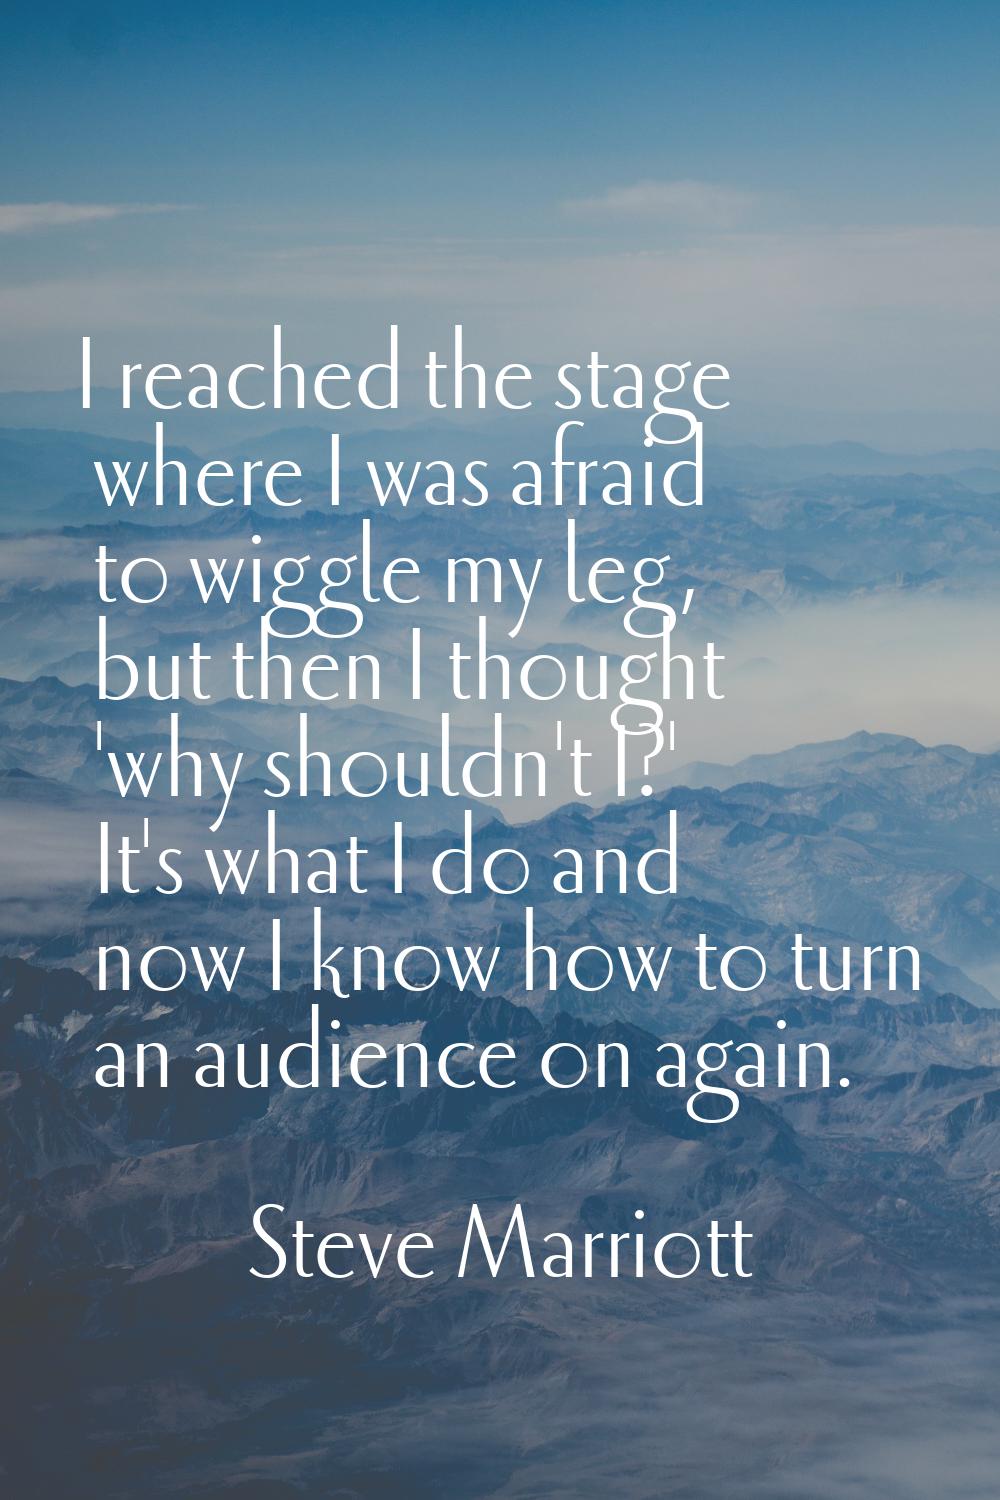 I reached the stage where I was afraid to wiggle my leg, but then I thought 'why shouldn't I?' It's